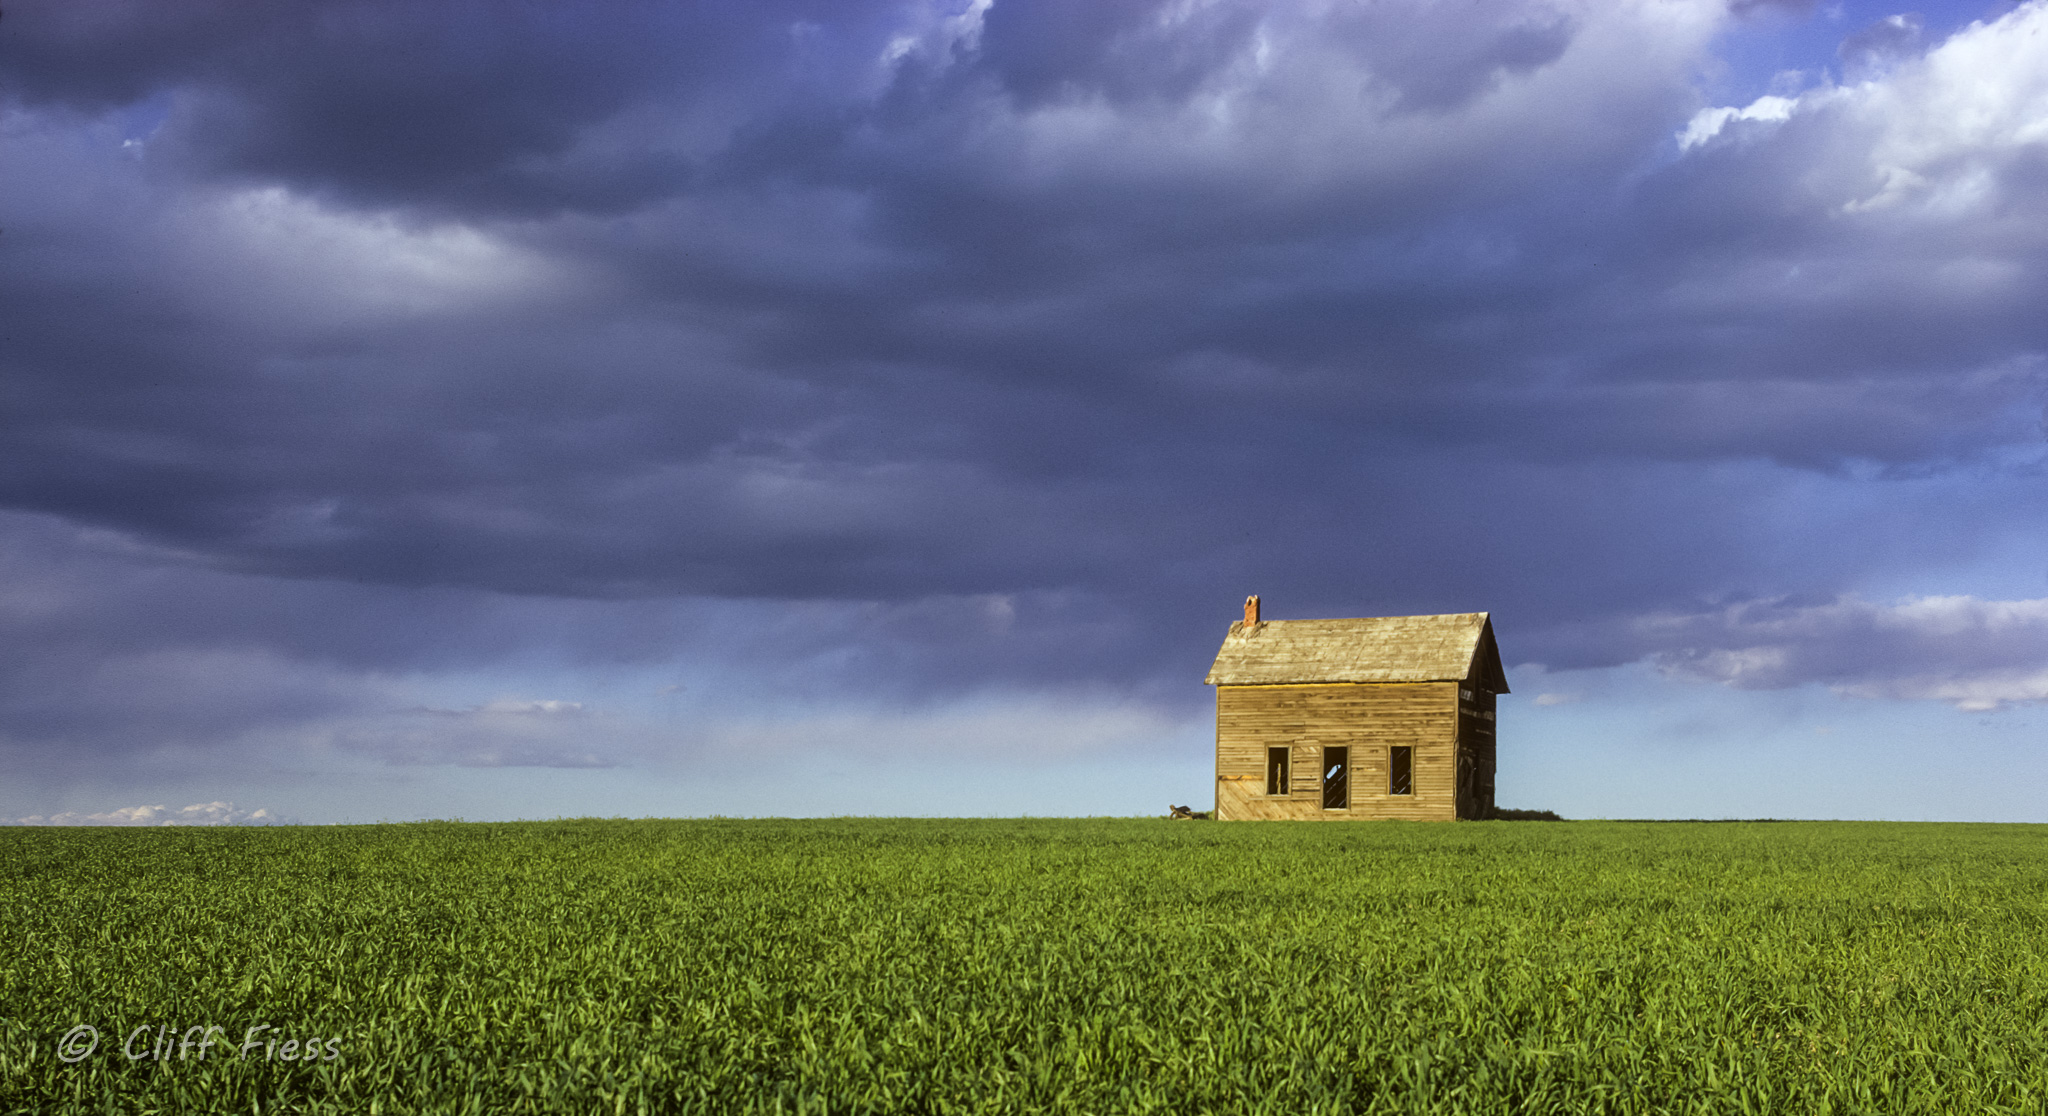 Abandoned house in a wheat field